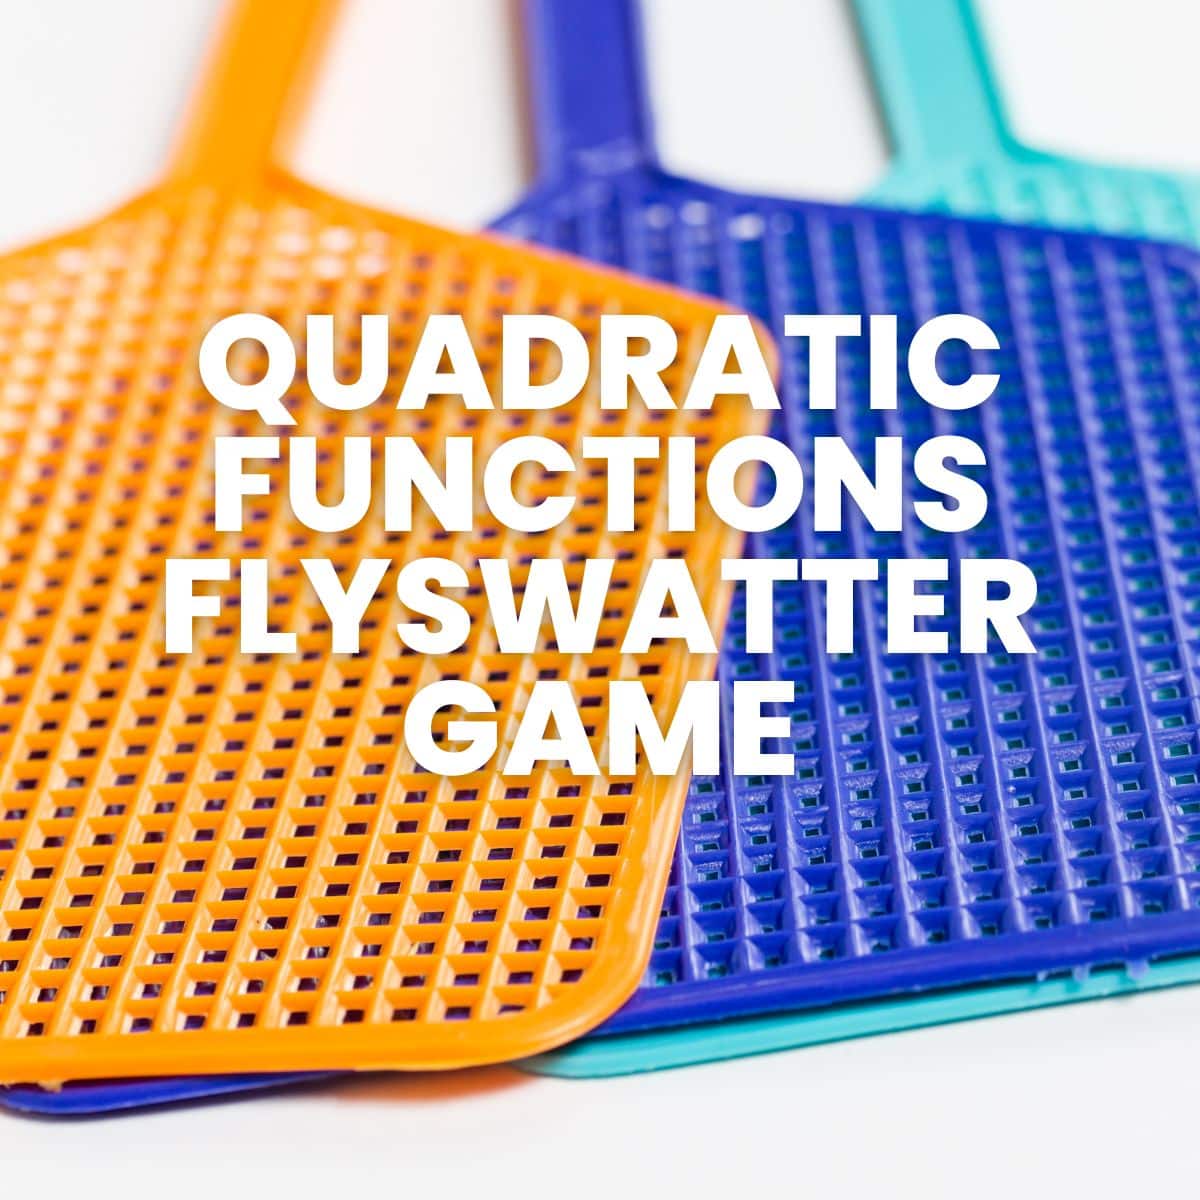 three colorful flyswatters with text "quadratic functions flyswatter game" 